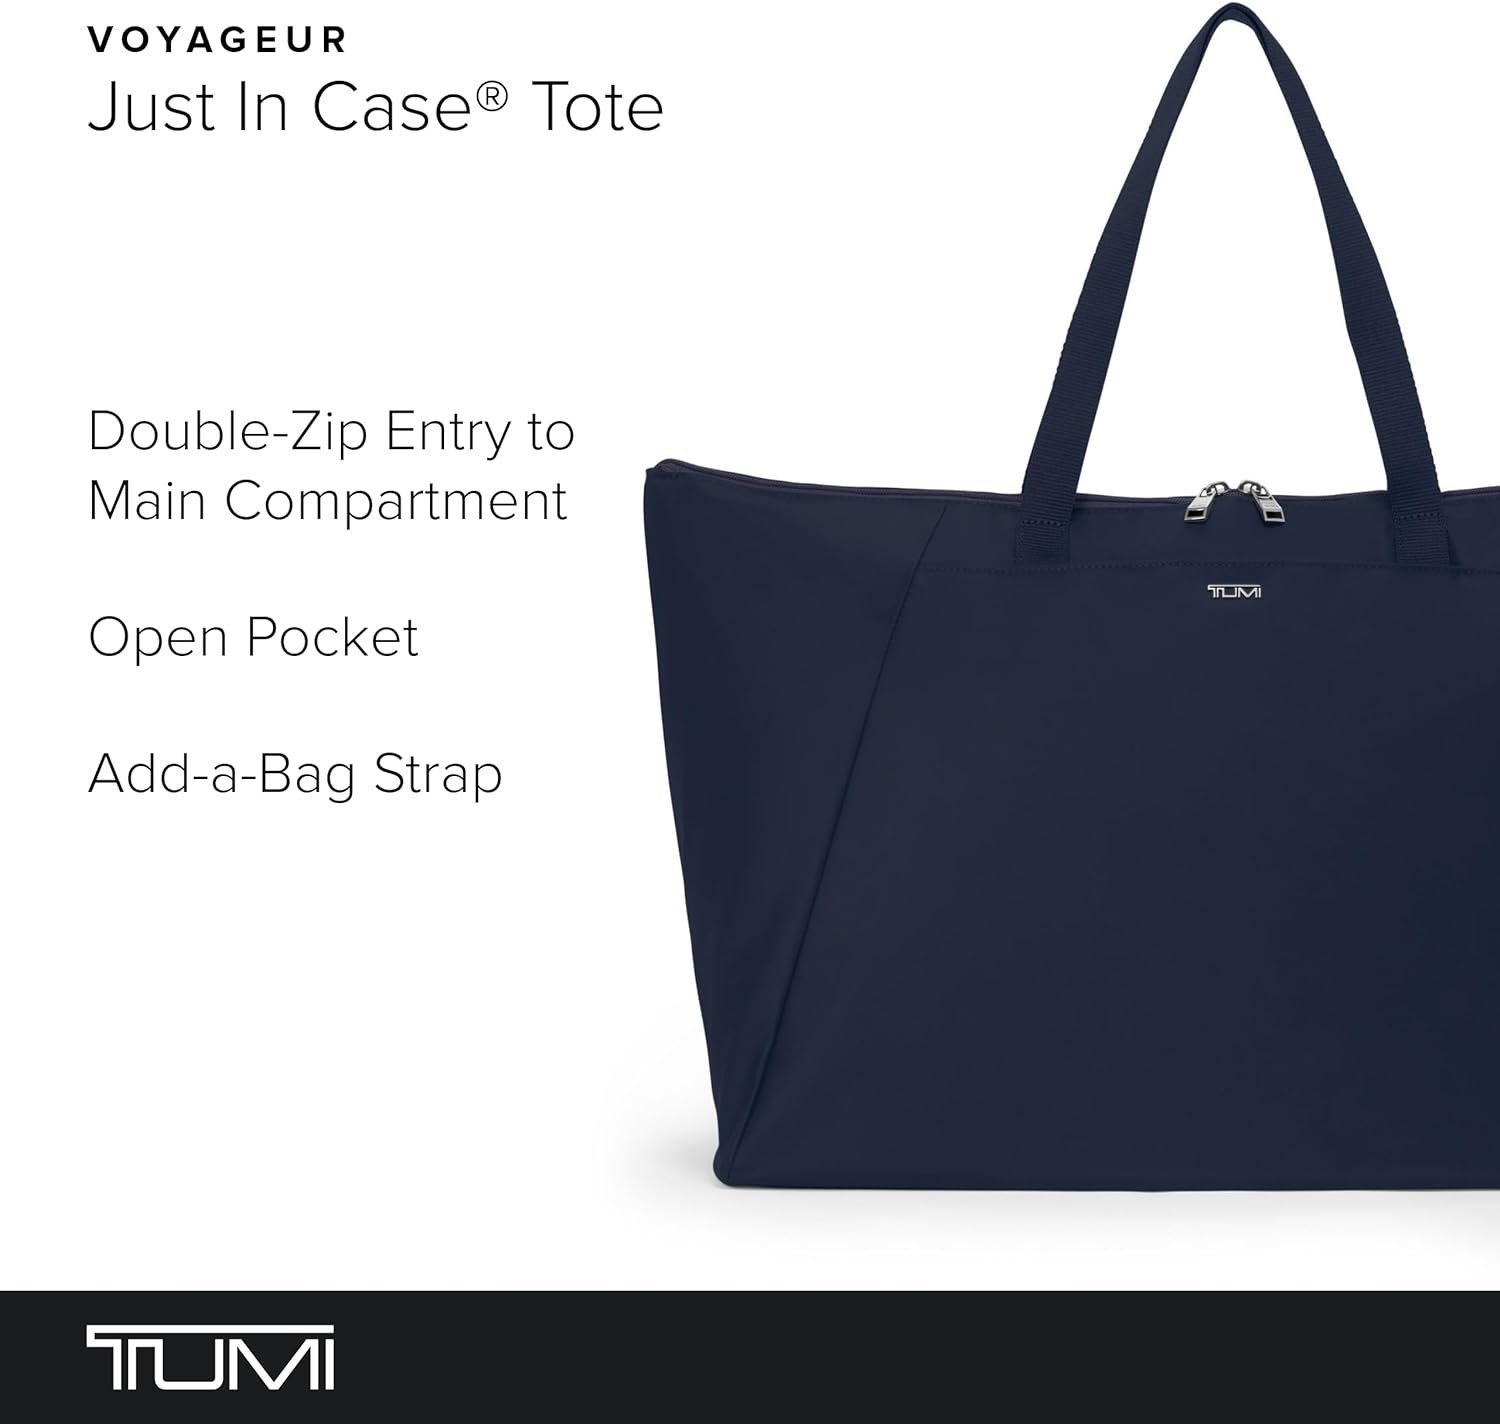 TUMI - Just In Case Tote - Packable Travel Bag - Foldable Travel Tote Bag- Water-Resistant Tote - 14.0 X 23.0 X 9.0